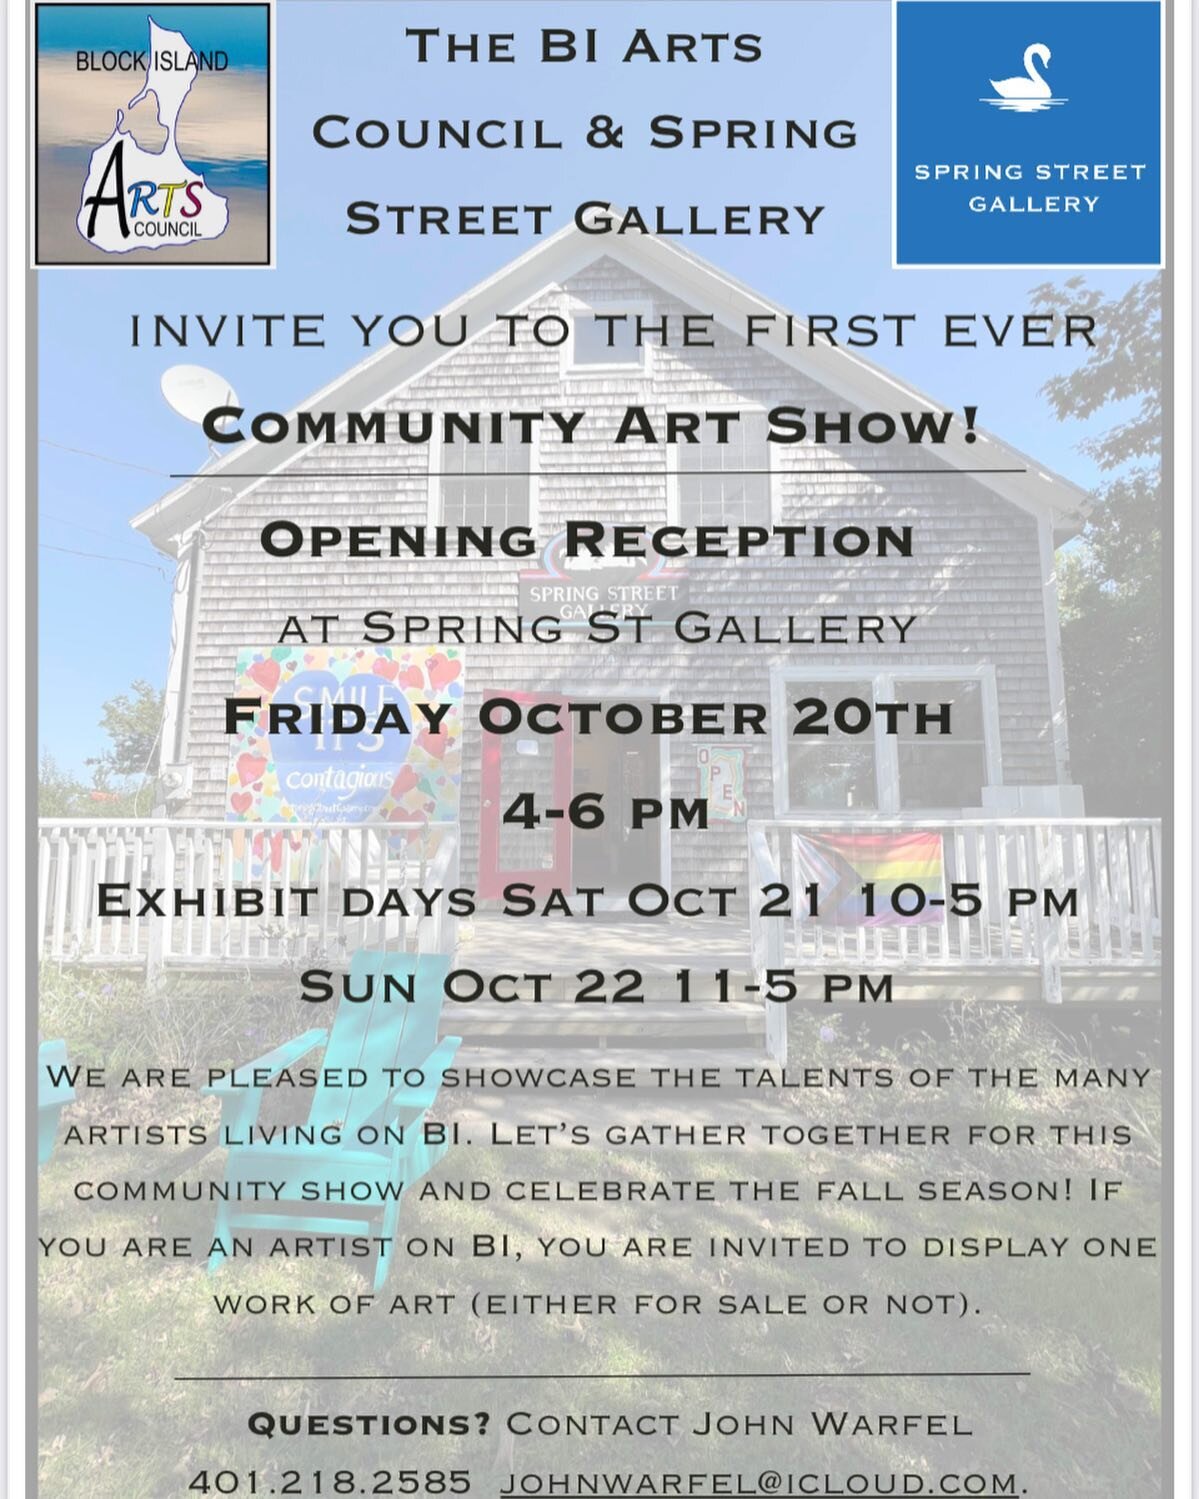 The BI Arts Council &amp; Spring Street Gallery
invite you to the first ever
Community Art Show! Opening Reception
at Spring St Gallery
Friday October 20th
4-6 pm
Exhibit days Sat Oct 21 10-5 pm Sun Oct 22 11-5 pm
We are pleased to showcase the talen